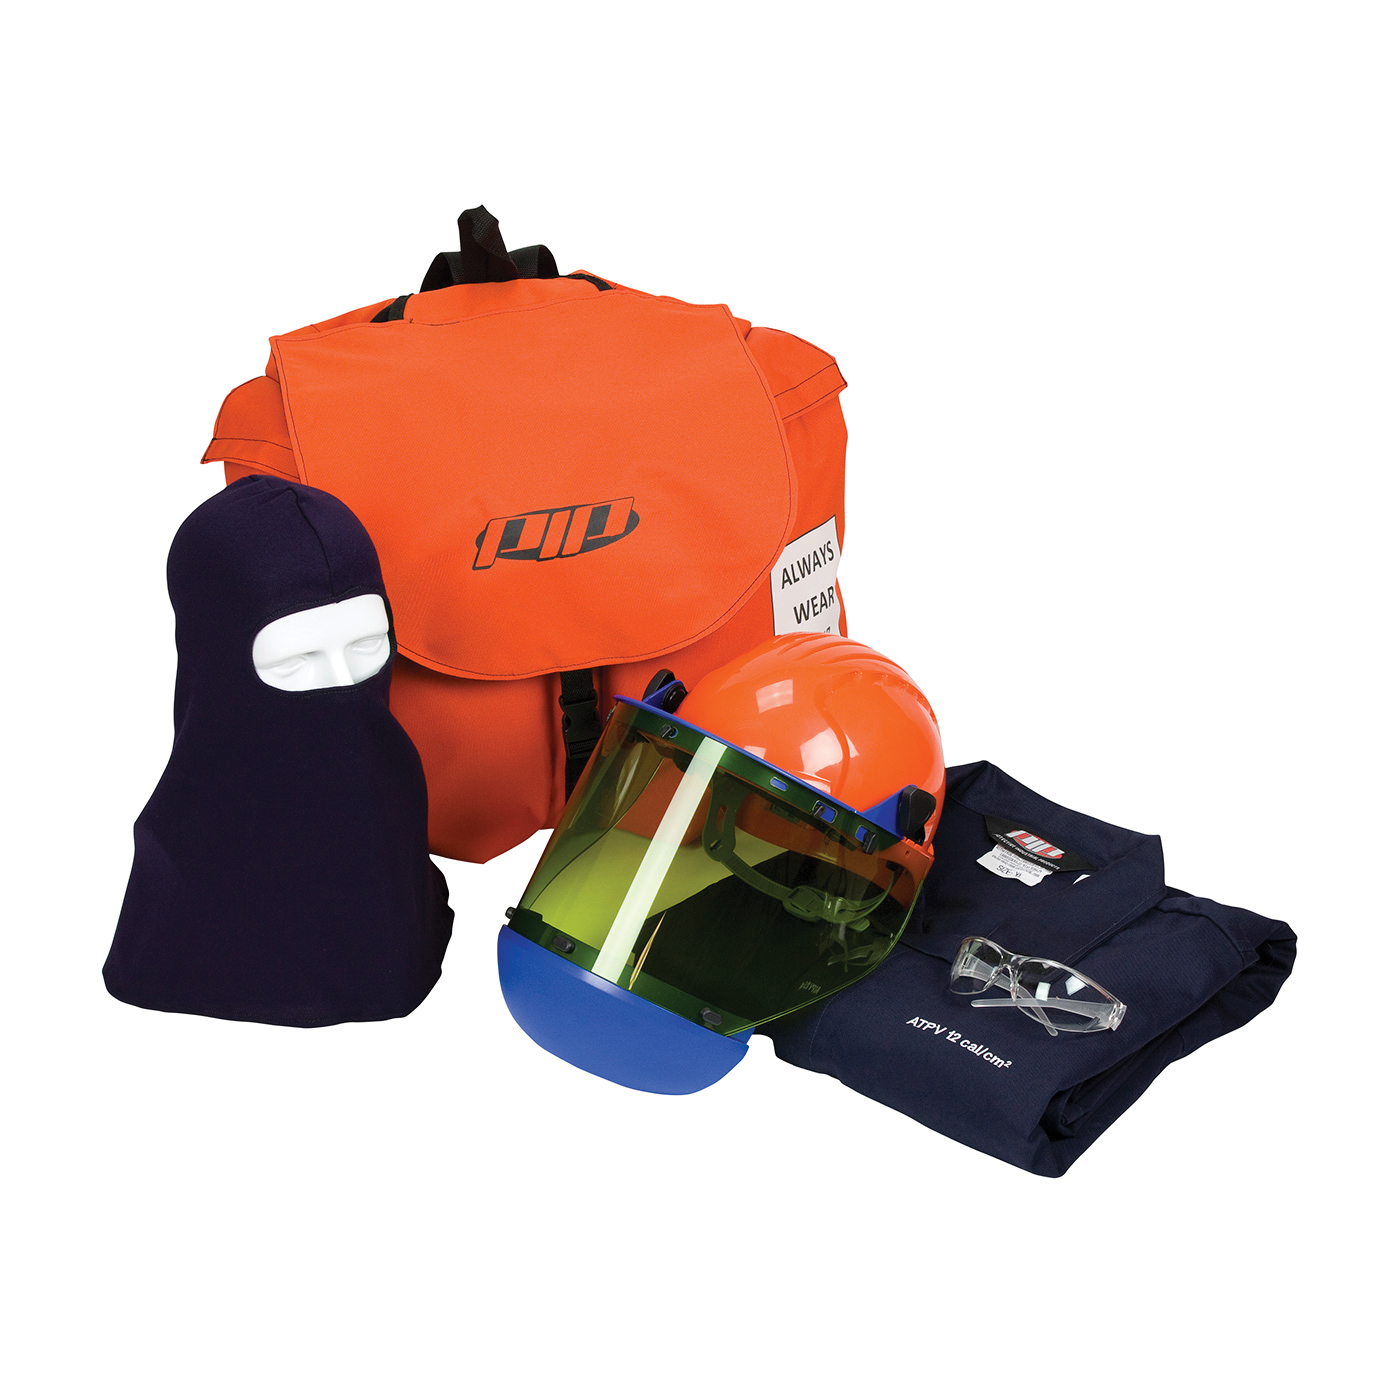 PIP® 9150-5488EB/3X Arc Flash Kit, Hazard Risk Category (HRC): 2, Hood/Face Shield Max Arc Flash Protection: 12 cal/sq-cm, Garment Max Arc Flash Protection: 12 cal/sq-cm, Specifications Met: NFPA 70E-2018, Arc Shield/Hard Hat Head/Face Protection